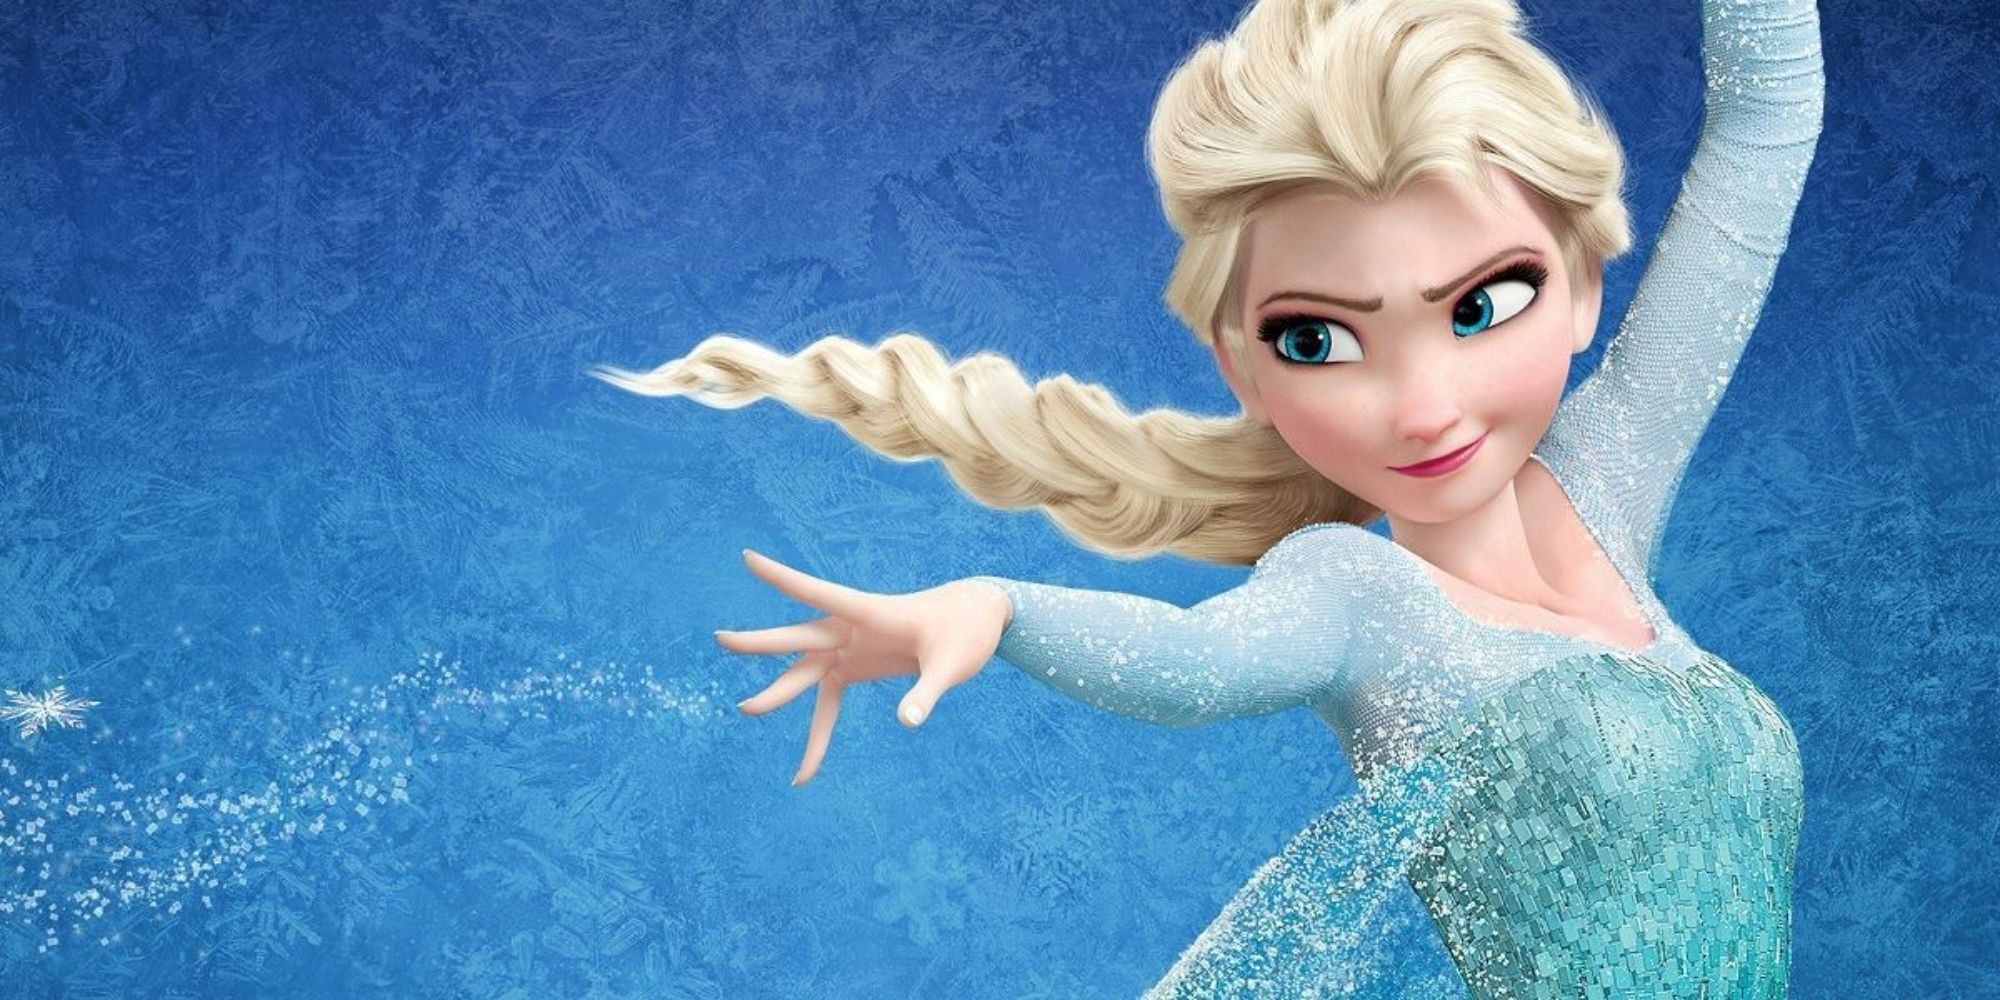 A promotional shot of Queen Elsa from Disney's Frozen posing with her arm outstretched against a blue background